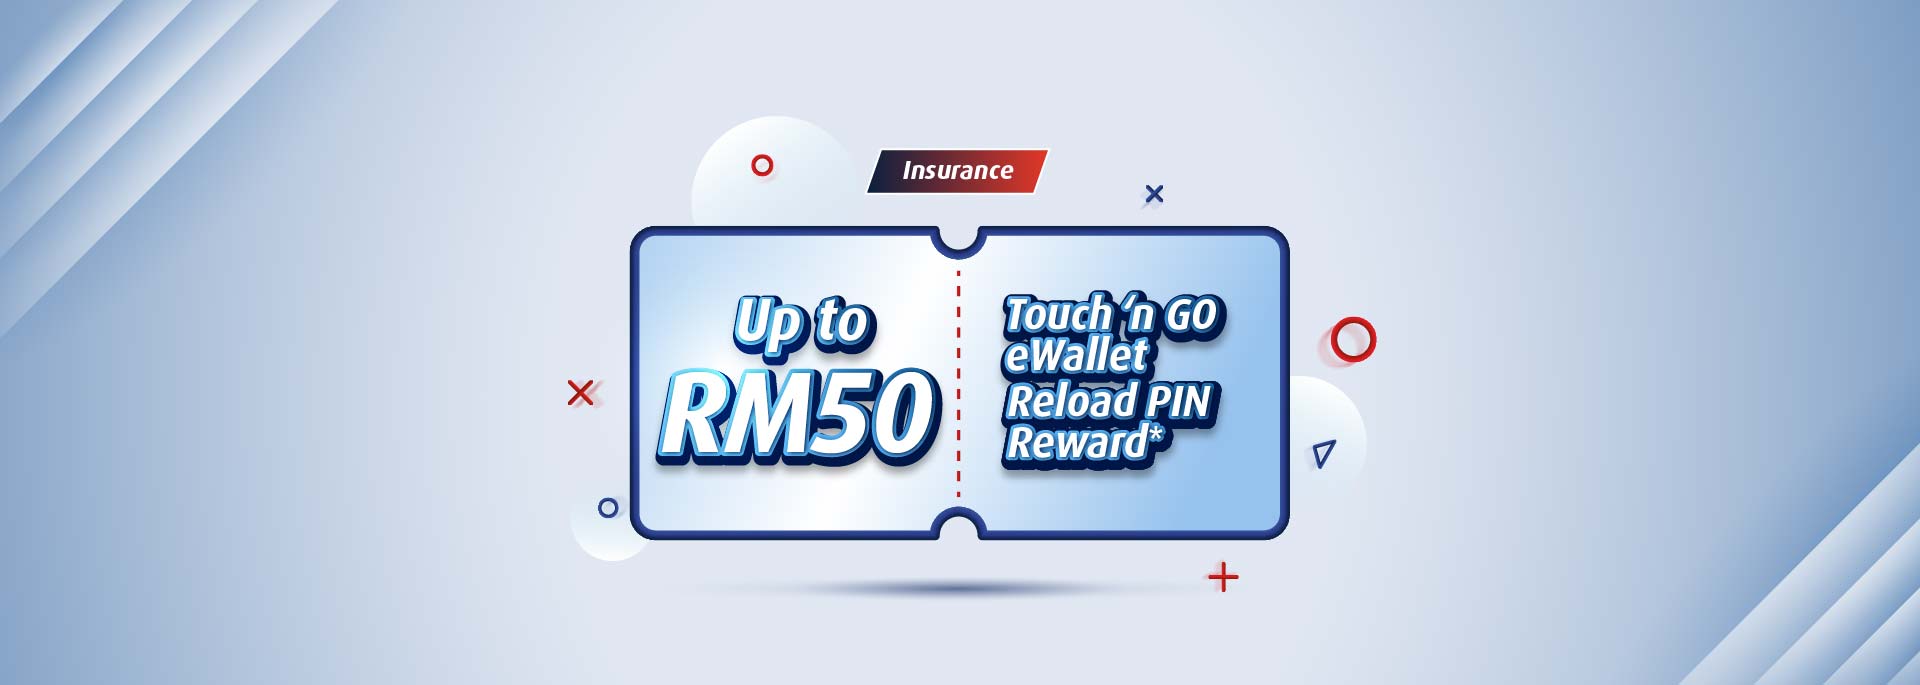 Up to RM50 Touch'n GO eWallet Reload PIN Reward*